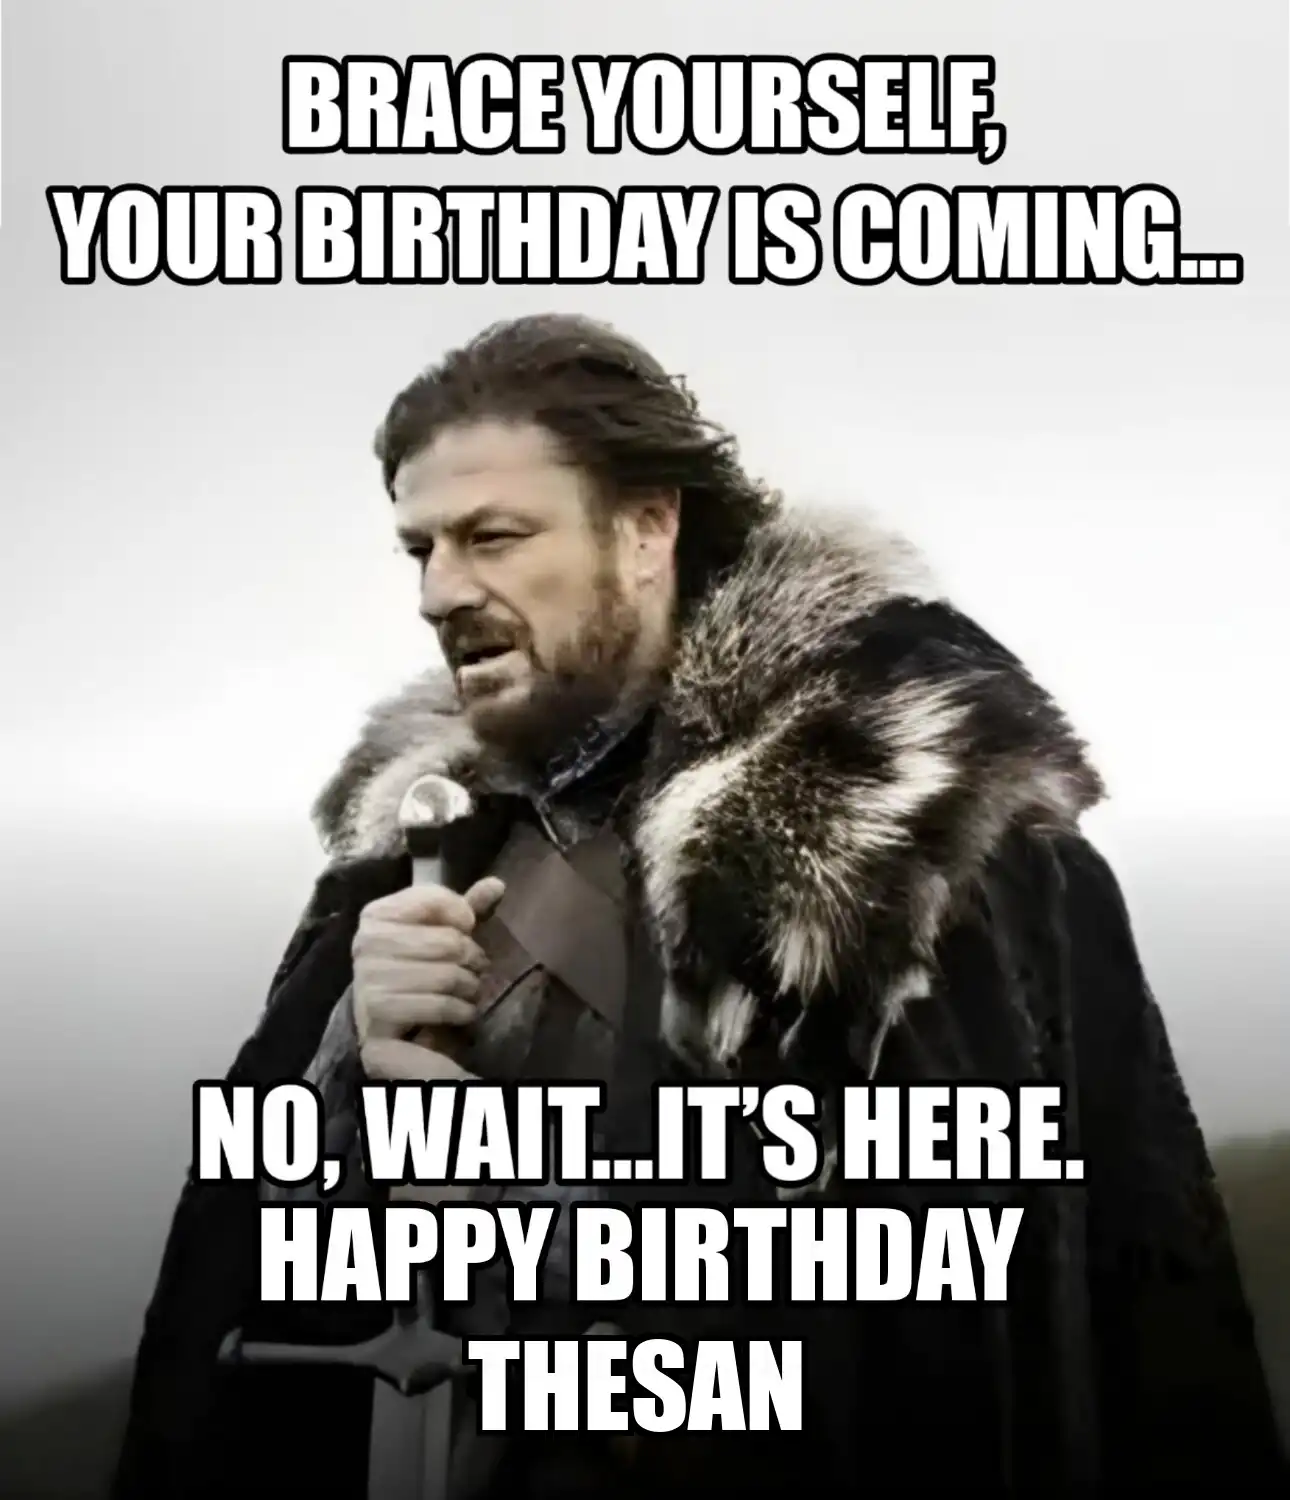 Happy Birthday Thesan Brace Yourself Your Birthday Is Coming Meme